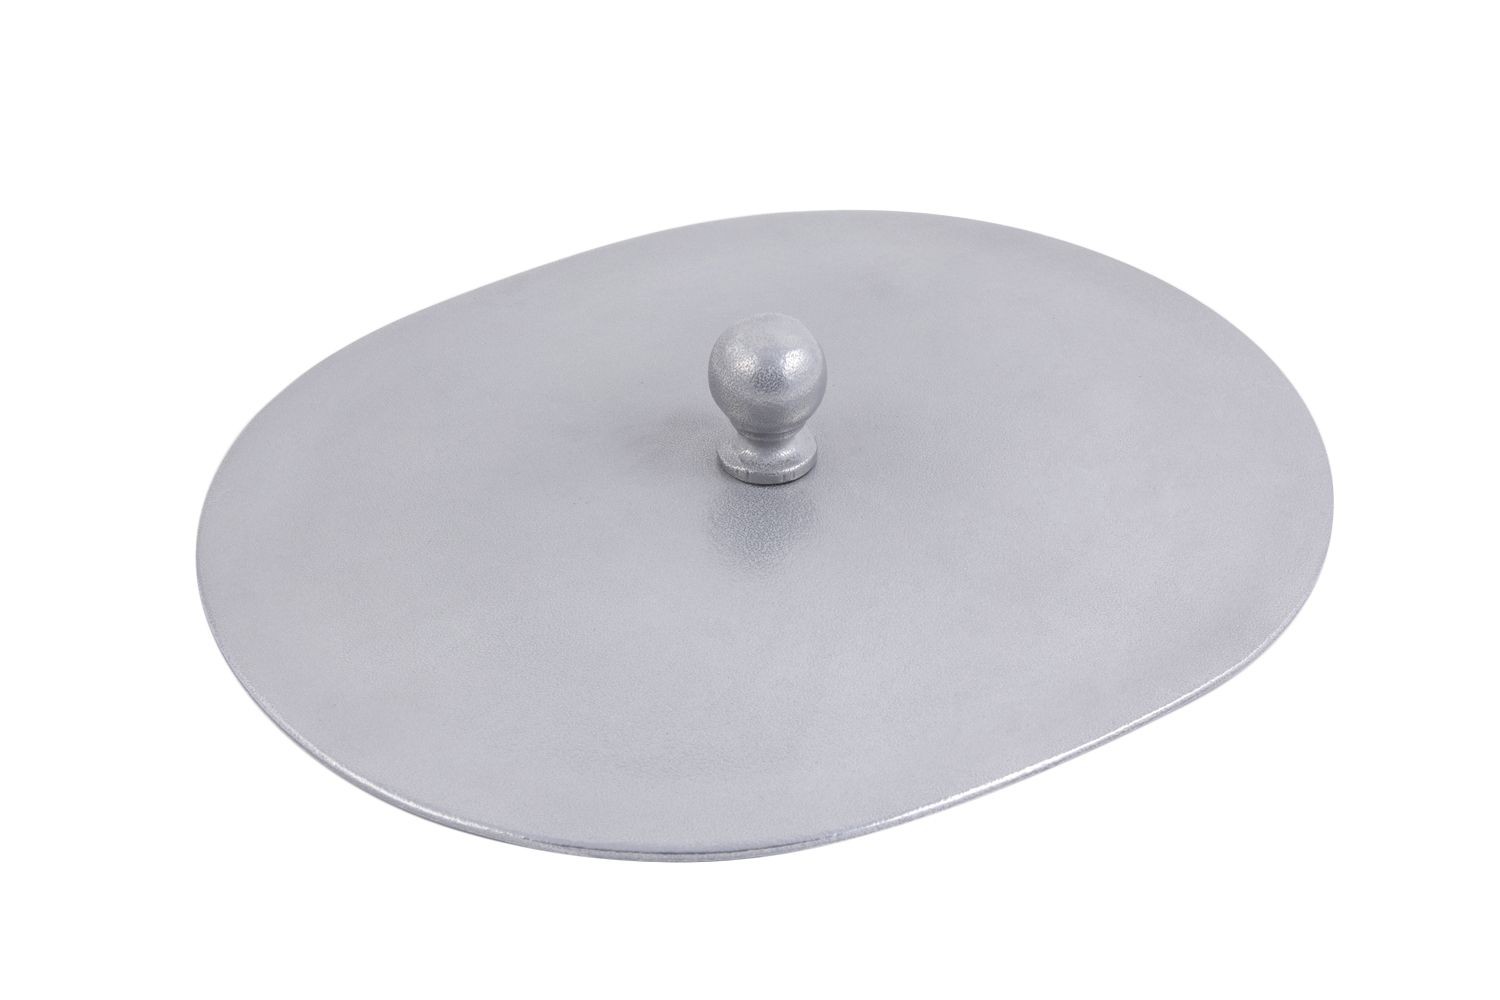 Bon Chef 3028CP Bouillabaisse Dish Cover for 3028, Pewter Glo 8" x 9 3/4"